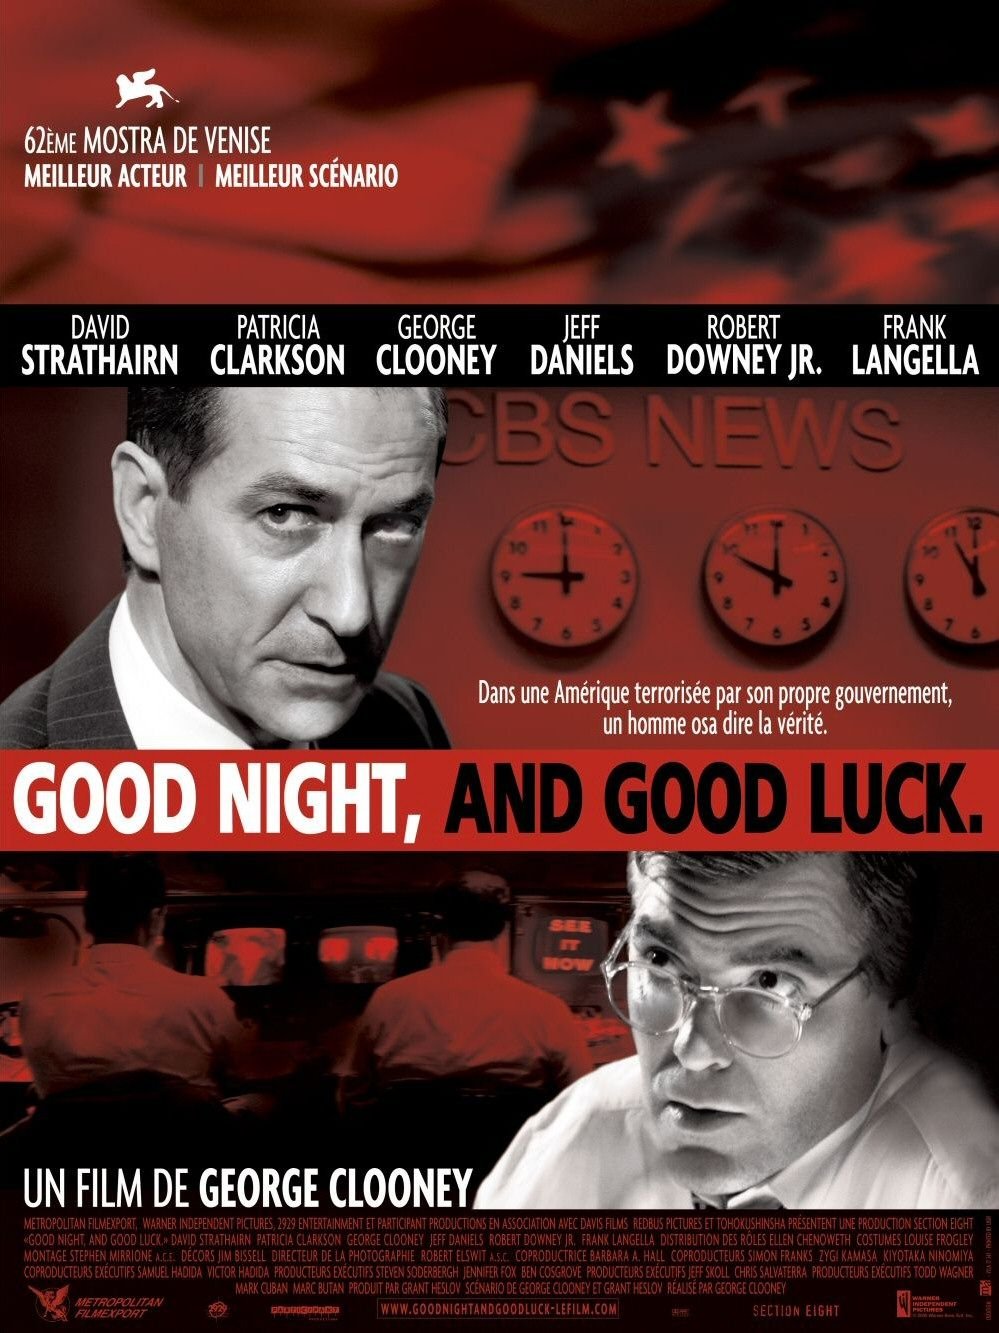 L'affiche du film Good Night, and Good Luck.